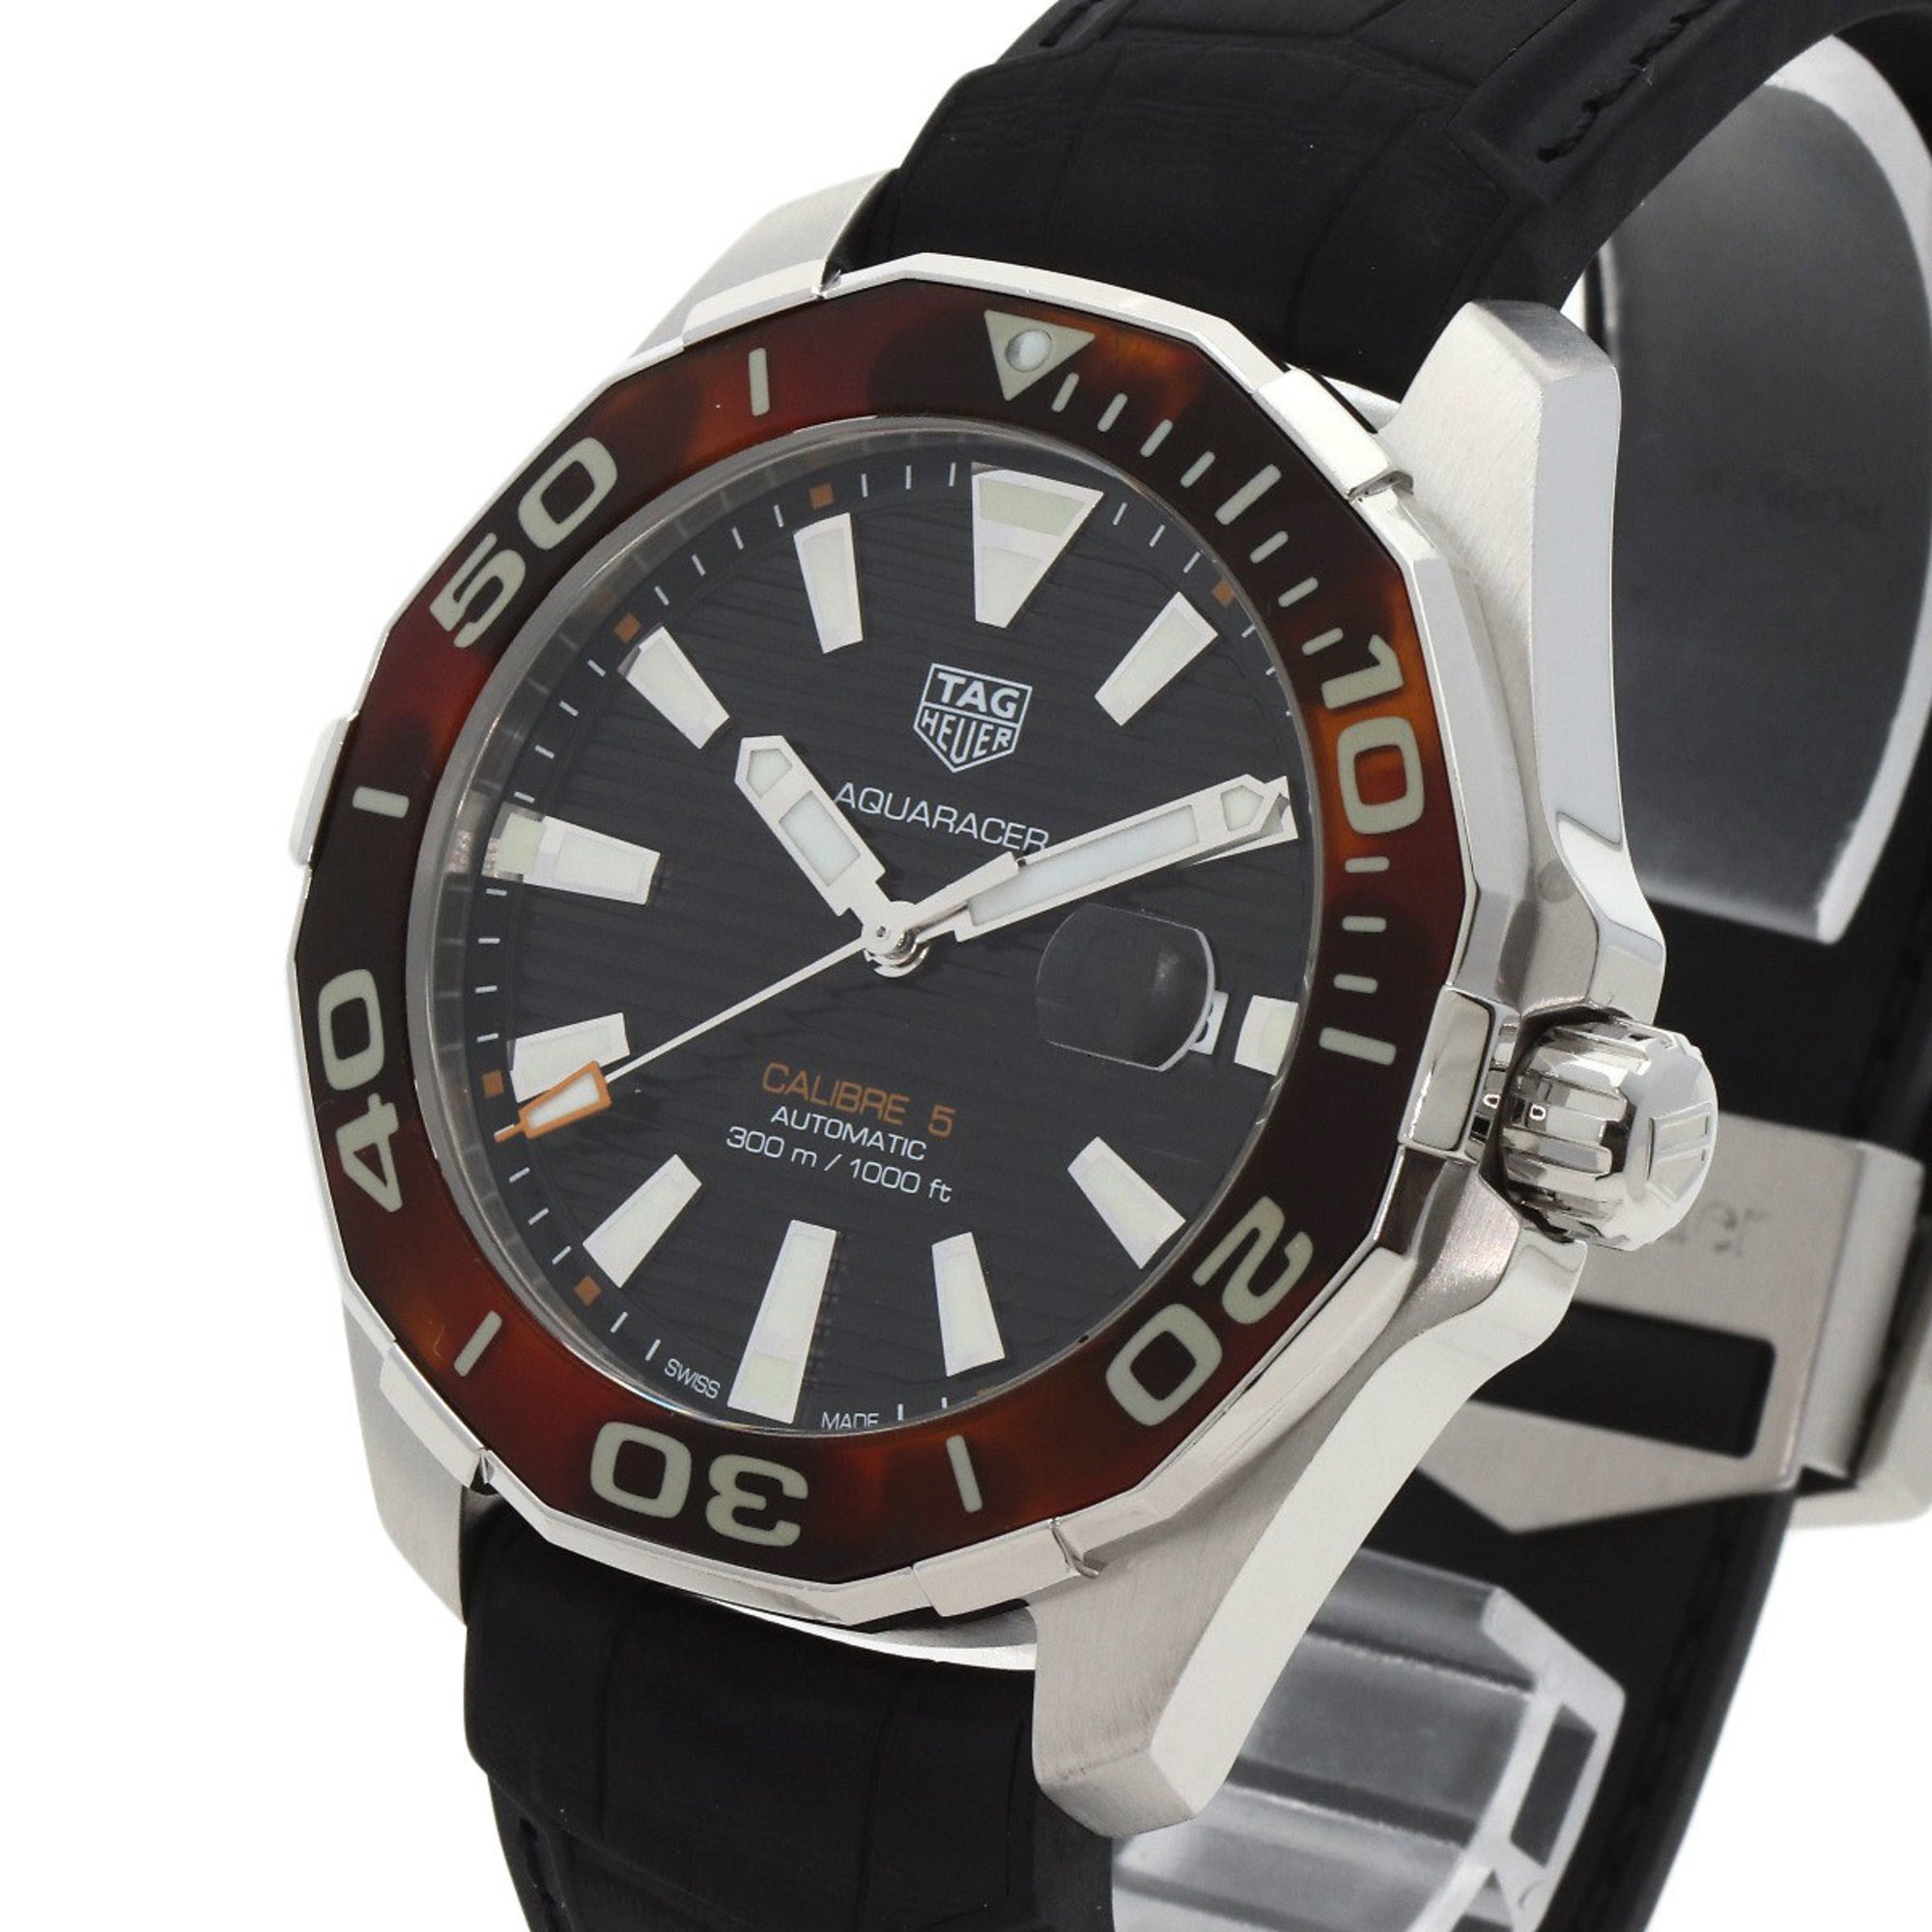 TAG Heuer WAY201N Aquaracer Calibre 5 Watch Stainless Steel Rubber Men's